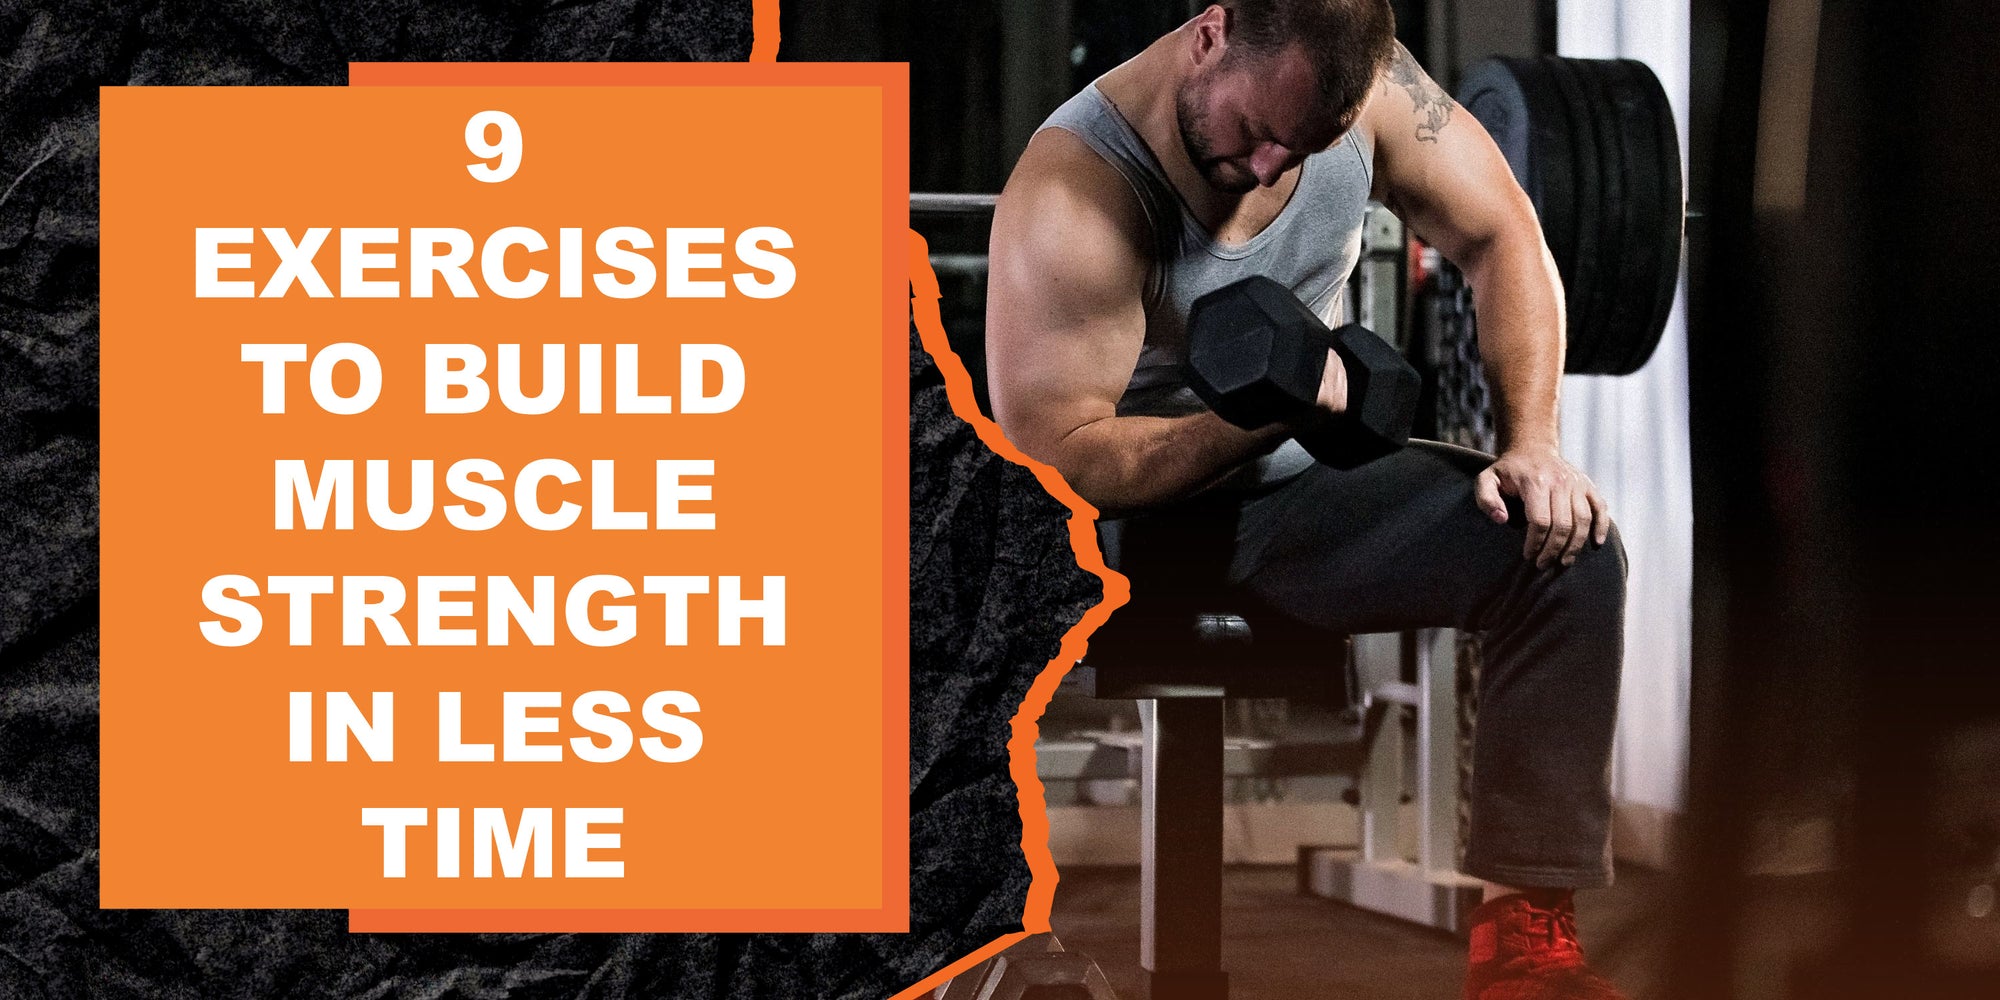 9 Exercises to Build Muscle Strength in Less Time